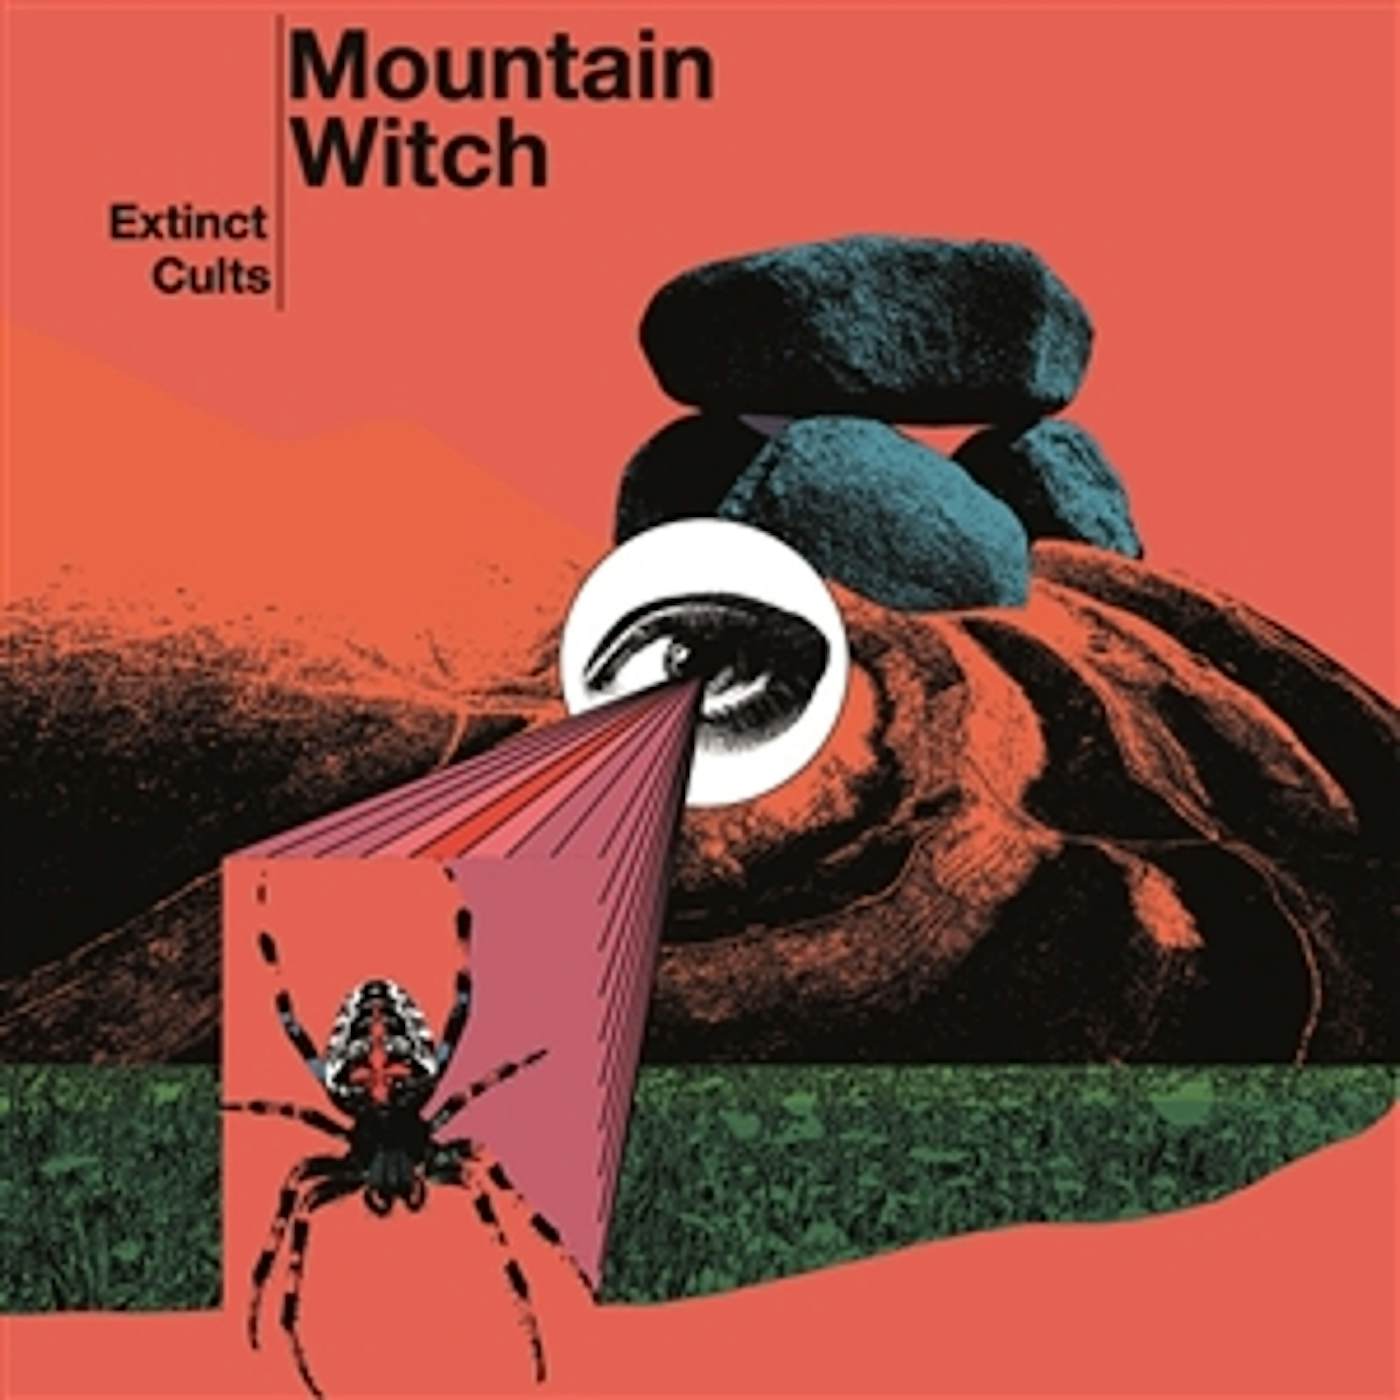 Mountain Witch Extinct Cults Vinyl Record